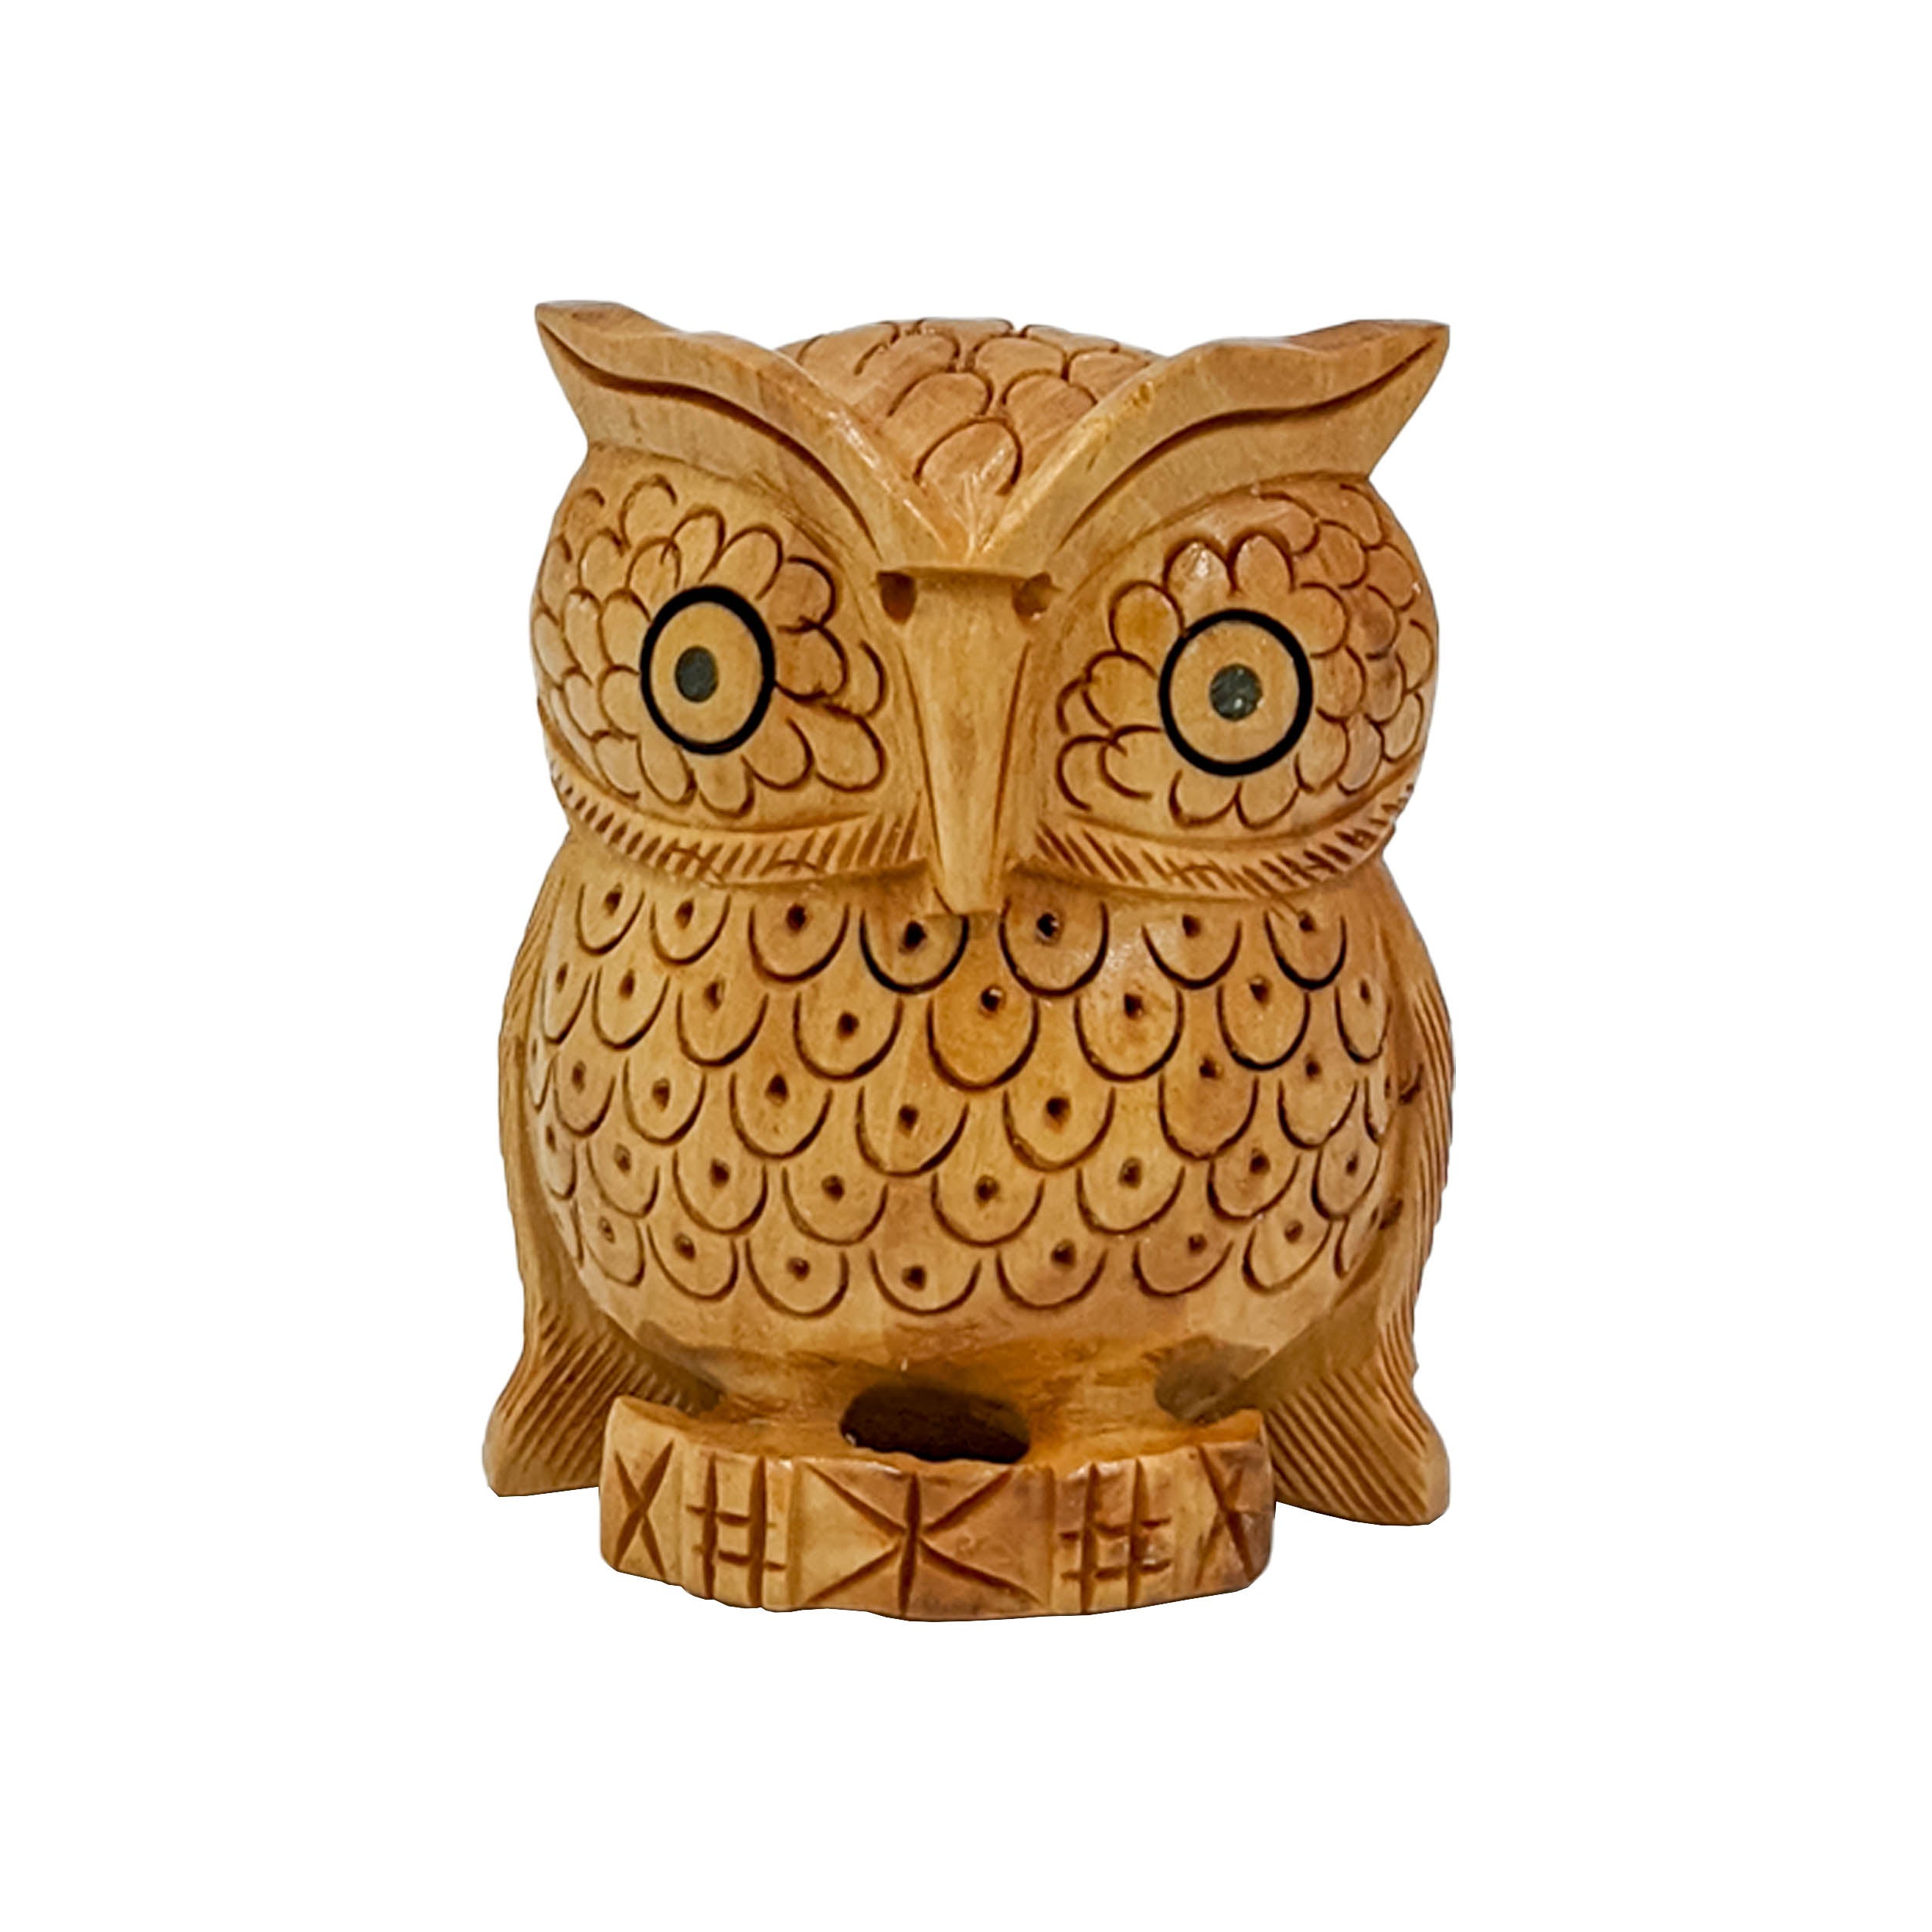 Handcrafted Wooden Owl Sitting Showpiece - Unique Home Decor Item  (Set of 5)